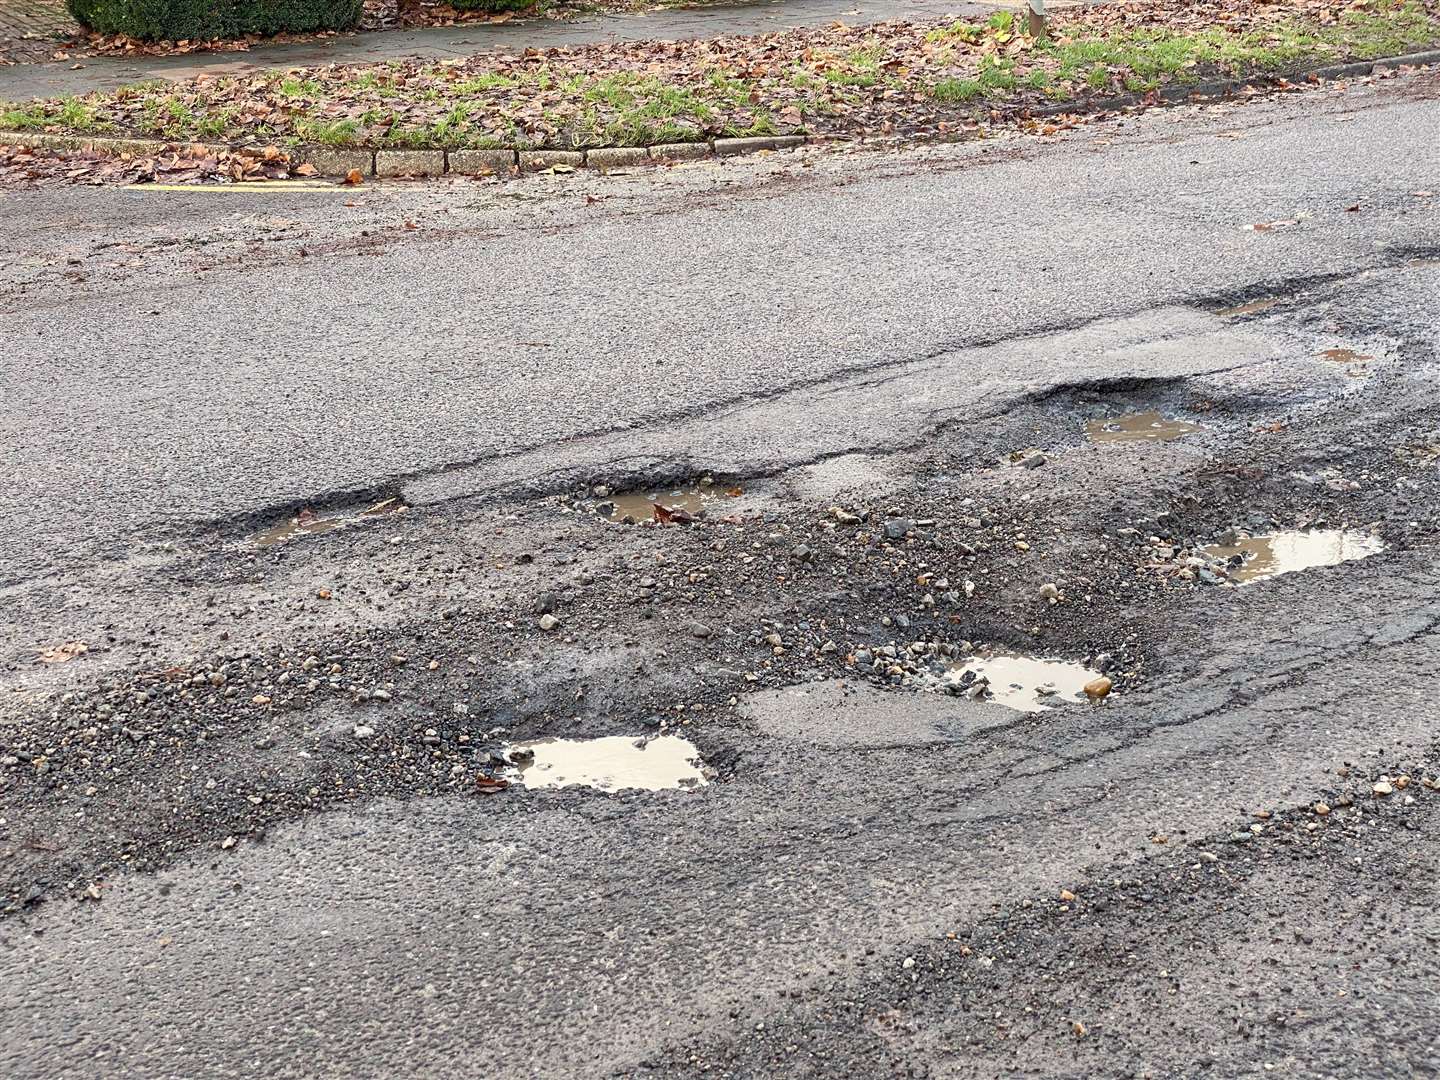 Residents say there are 100 yards of potholes in East Cross in Tenterden